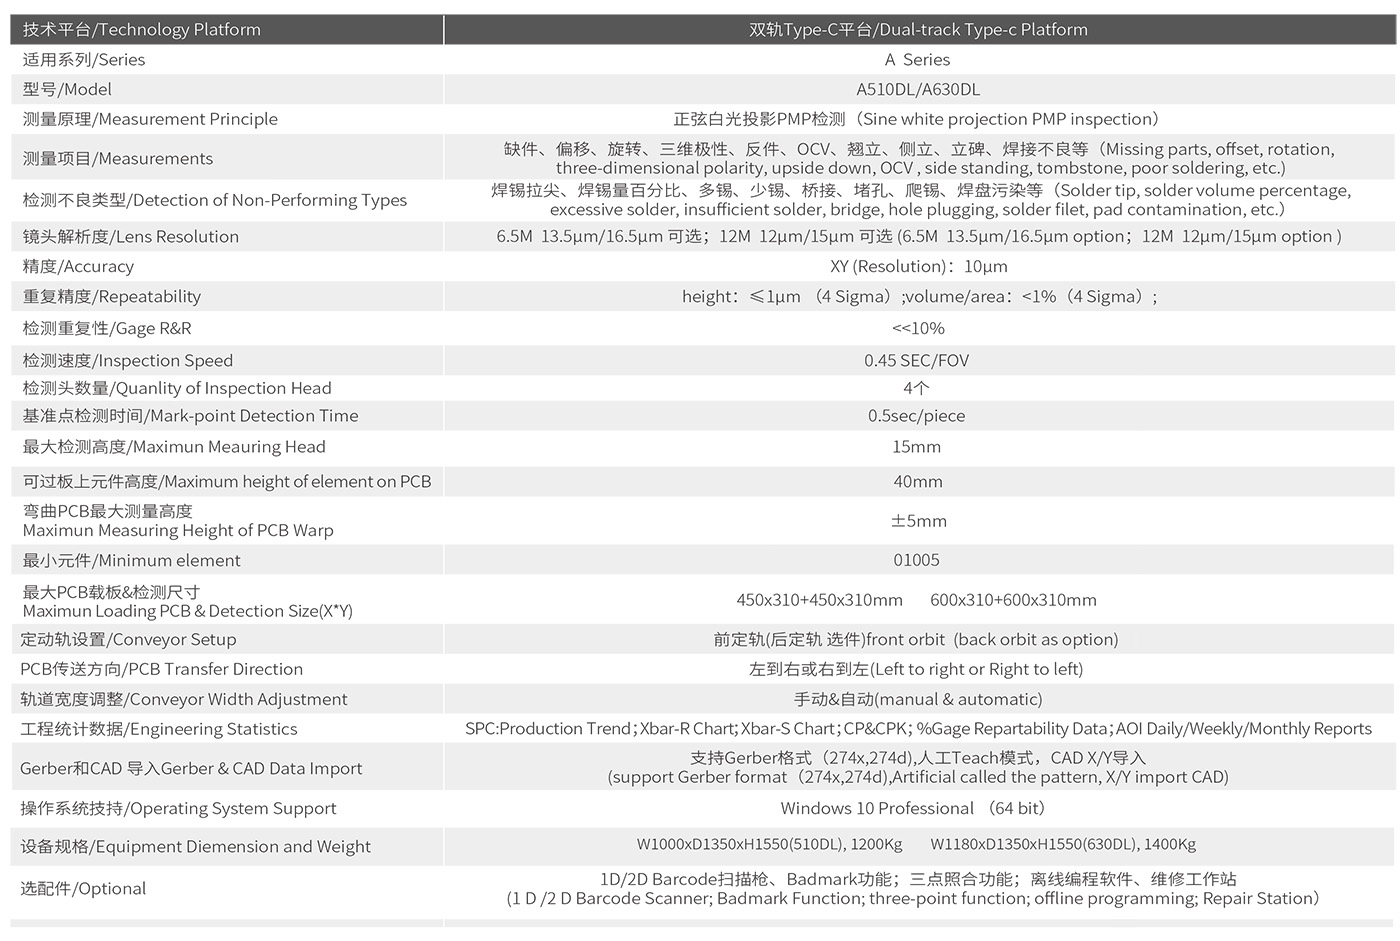 A-630DL Technical Specifications